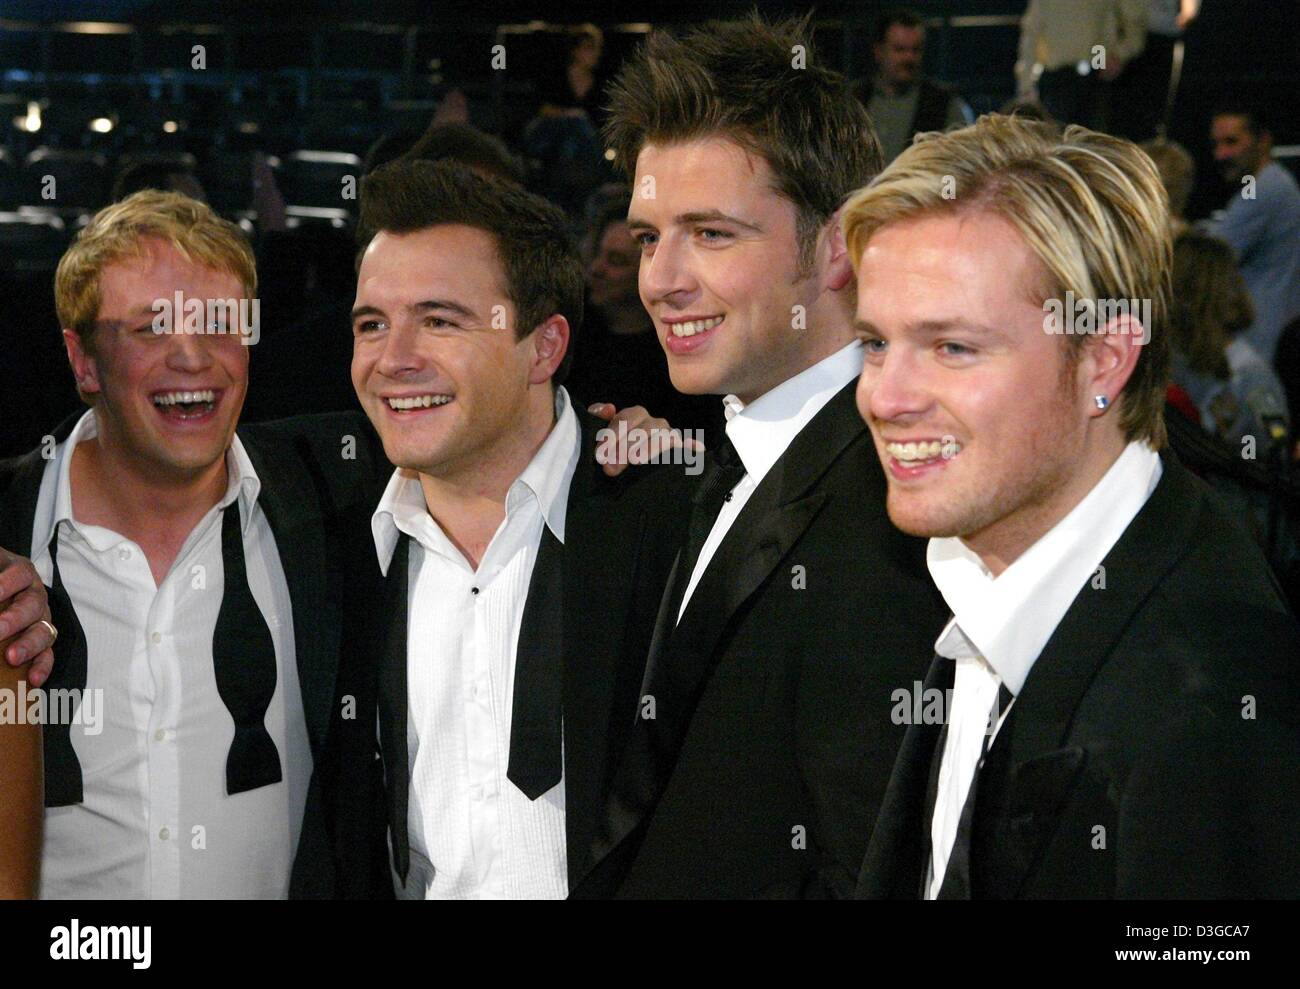 (dpa) - Irish boygroup westlife stands on stage during the first taping of new German TV show 'TARATATA' in Cologne, Germany, 18 October 2004. The show plans to present a broad selection of performances from international music stars. Stock Photo